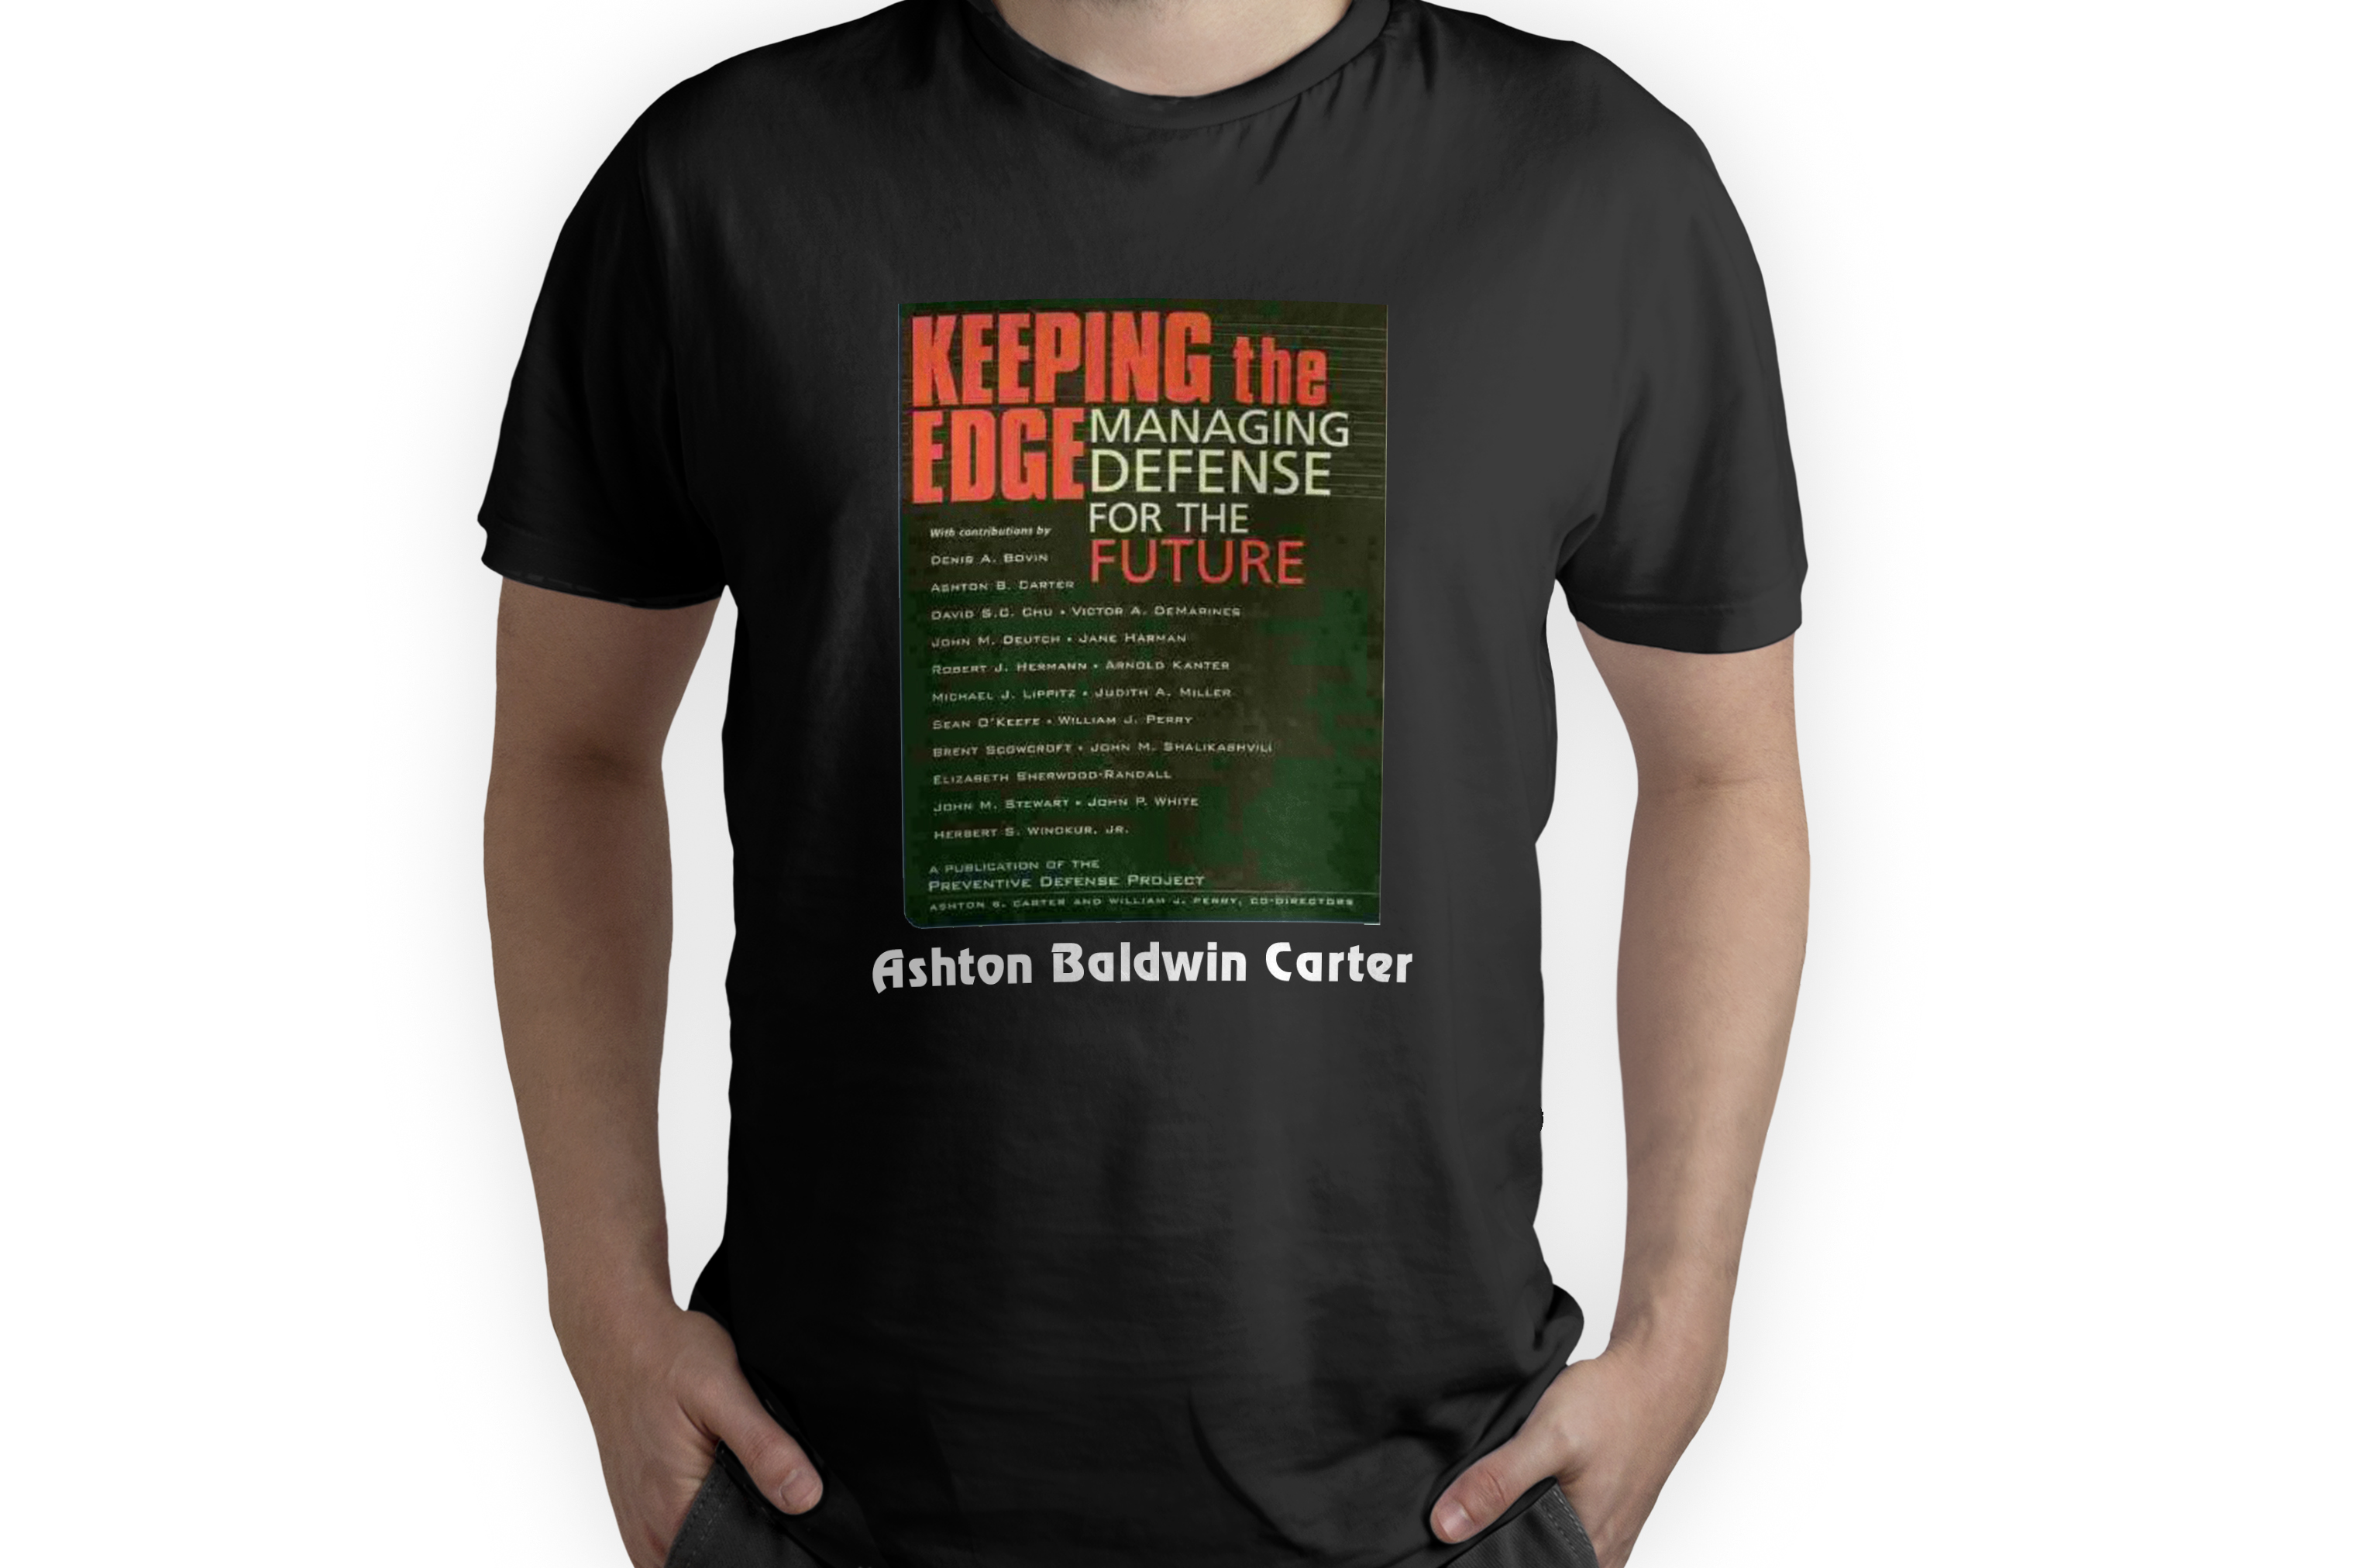 Ash B Carter Shirts - Keeping The Edge Managing Defense For The Future Shirt Plus Size Up To 5xl | Trending Shirts